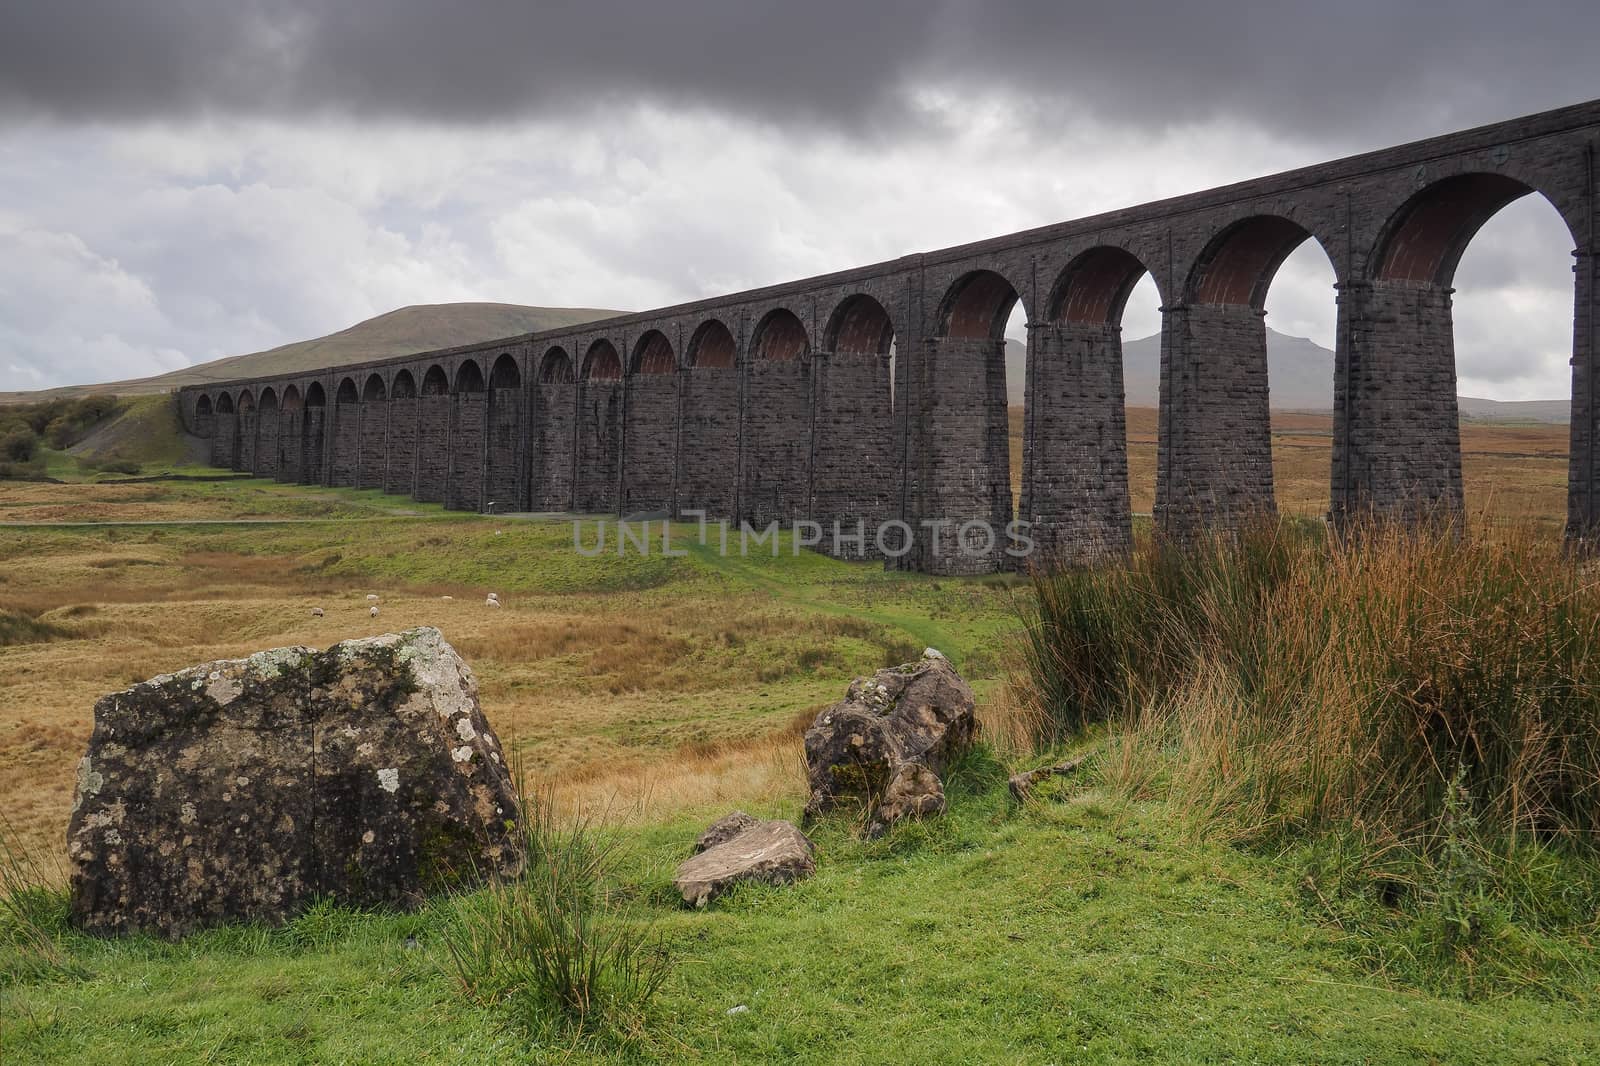 Overcast moody sky above the iconic Ribblehead Viaduct or Batty Moss Viaduct which carries the Settle to Carlisle railway across Batty Moss in the Ribble Valley, Yorkshire Dales, UK